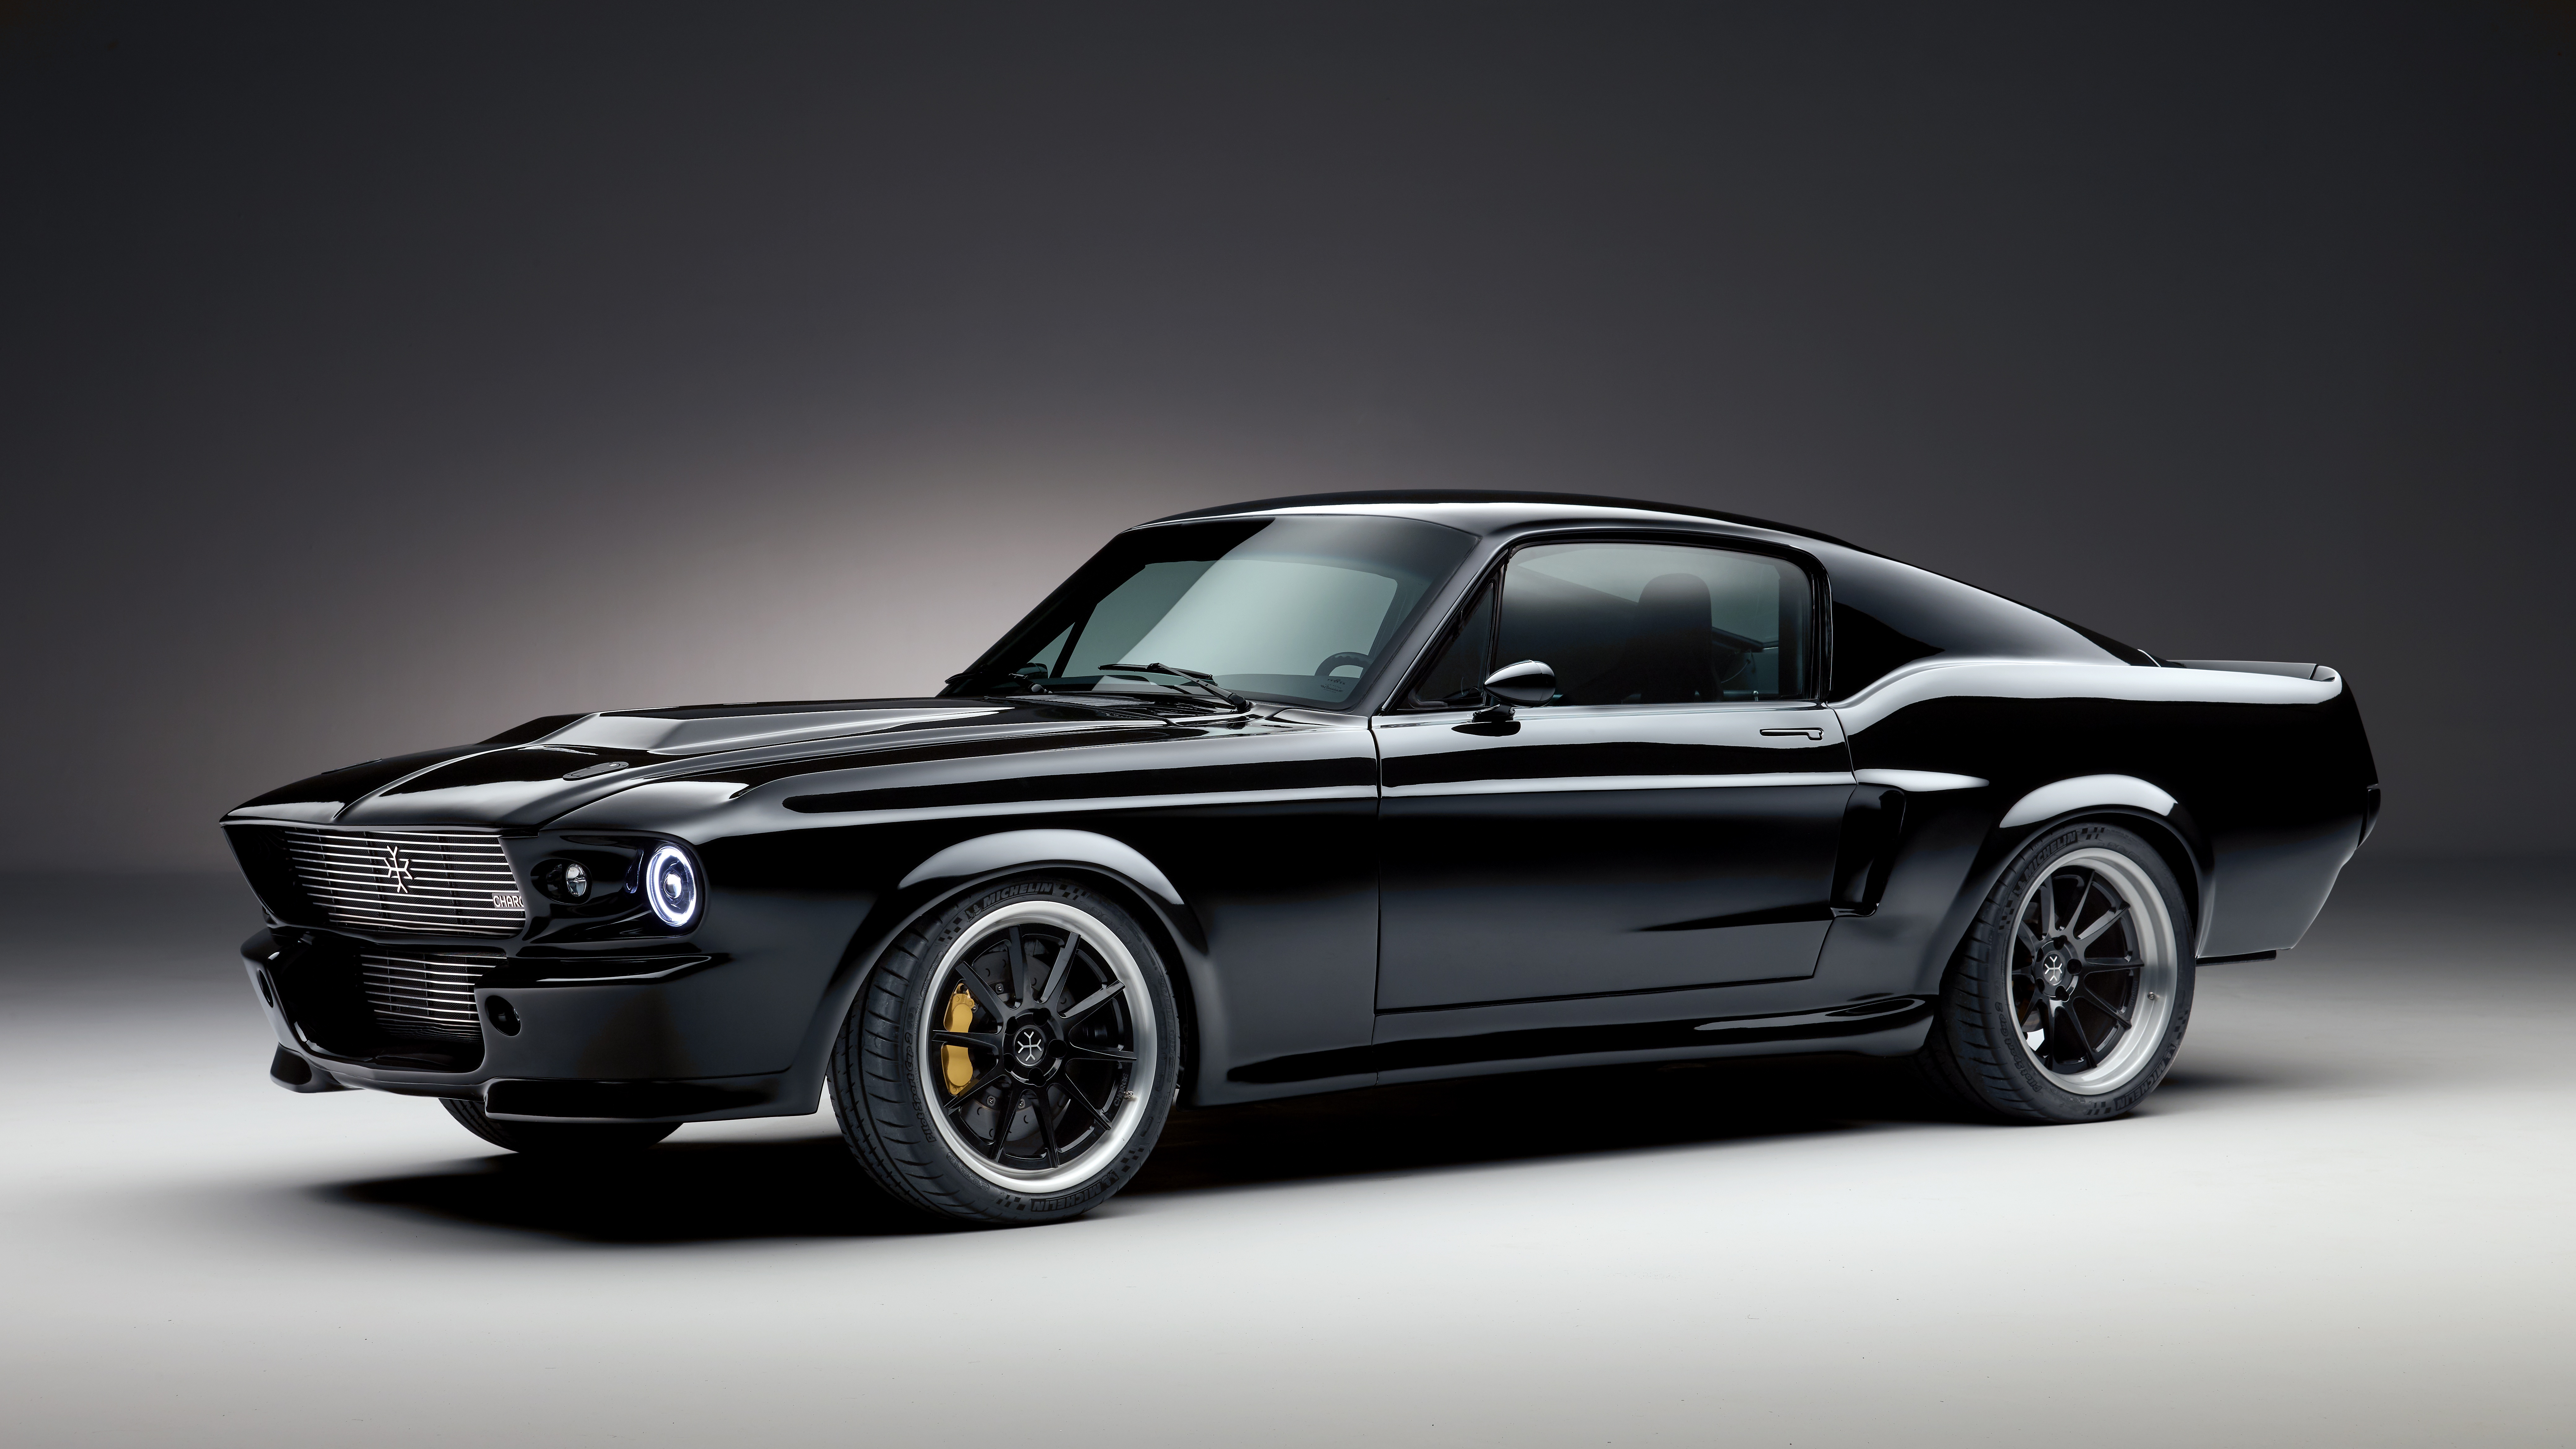 Black Car Car Electric Car Ford Ford Mustang Muscle Car Vehicle 8318x4678